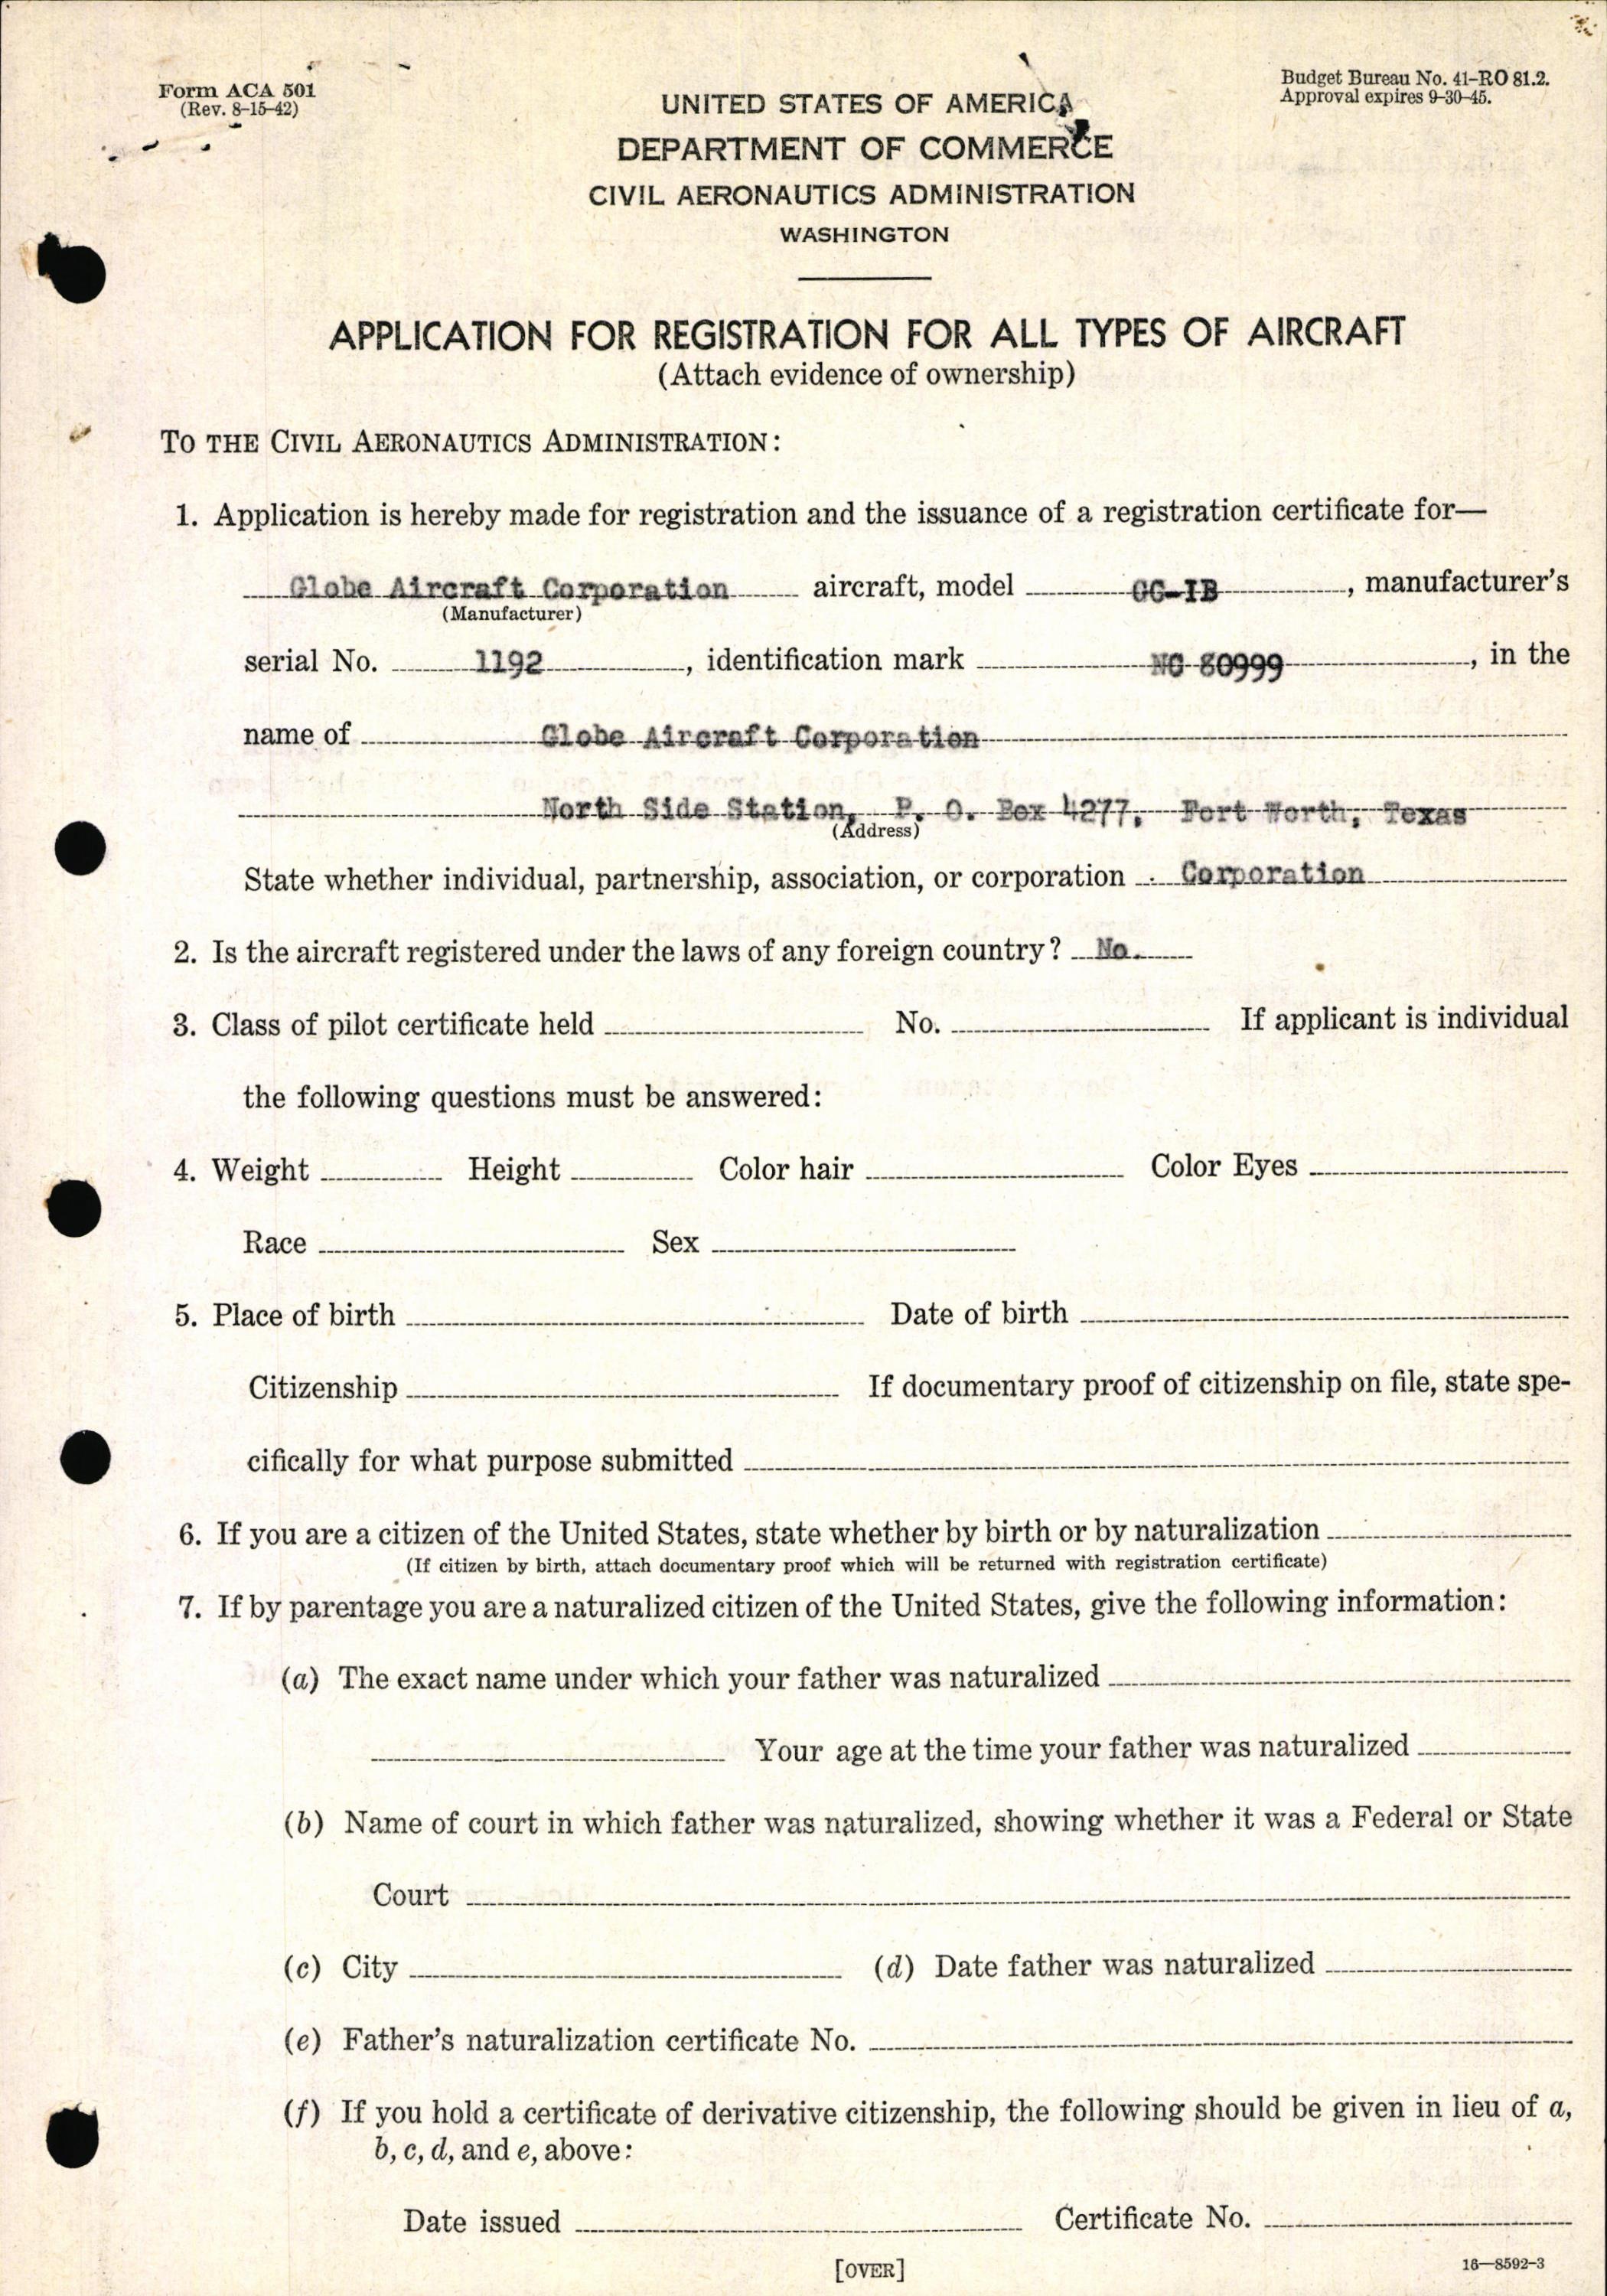 Sample page 3 from AirCorps Library document: Technical Information for Serial Number 1192